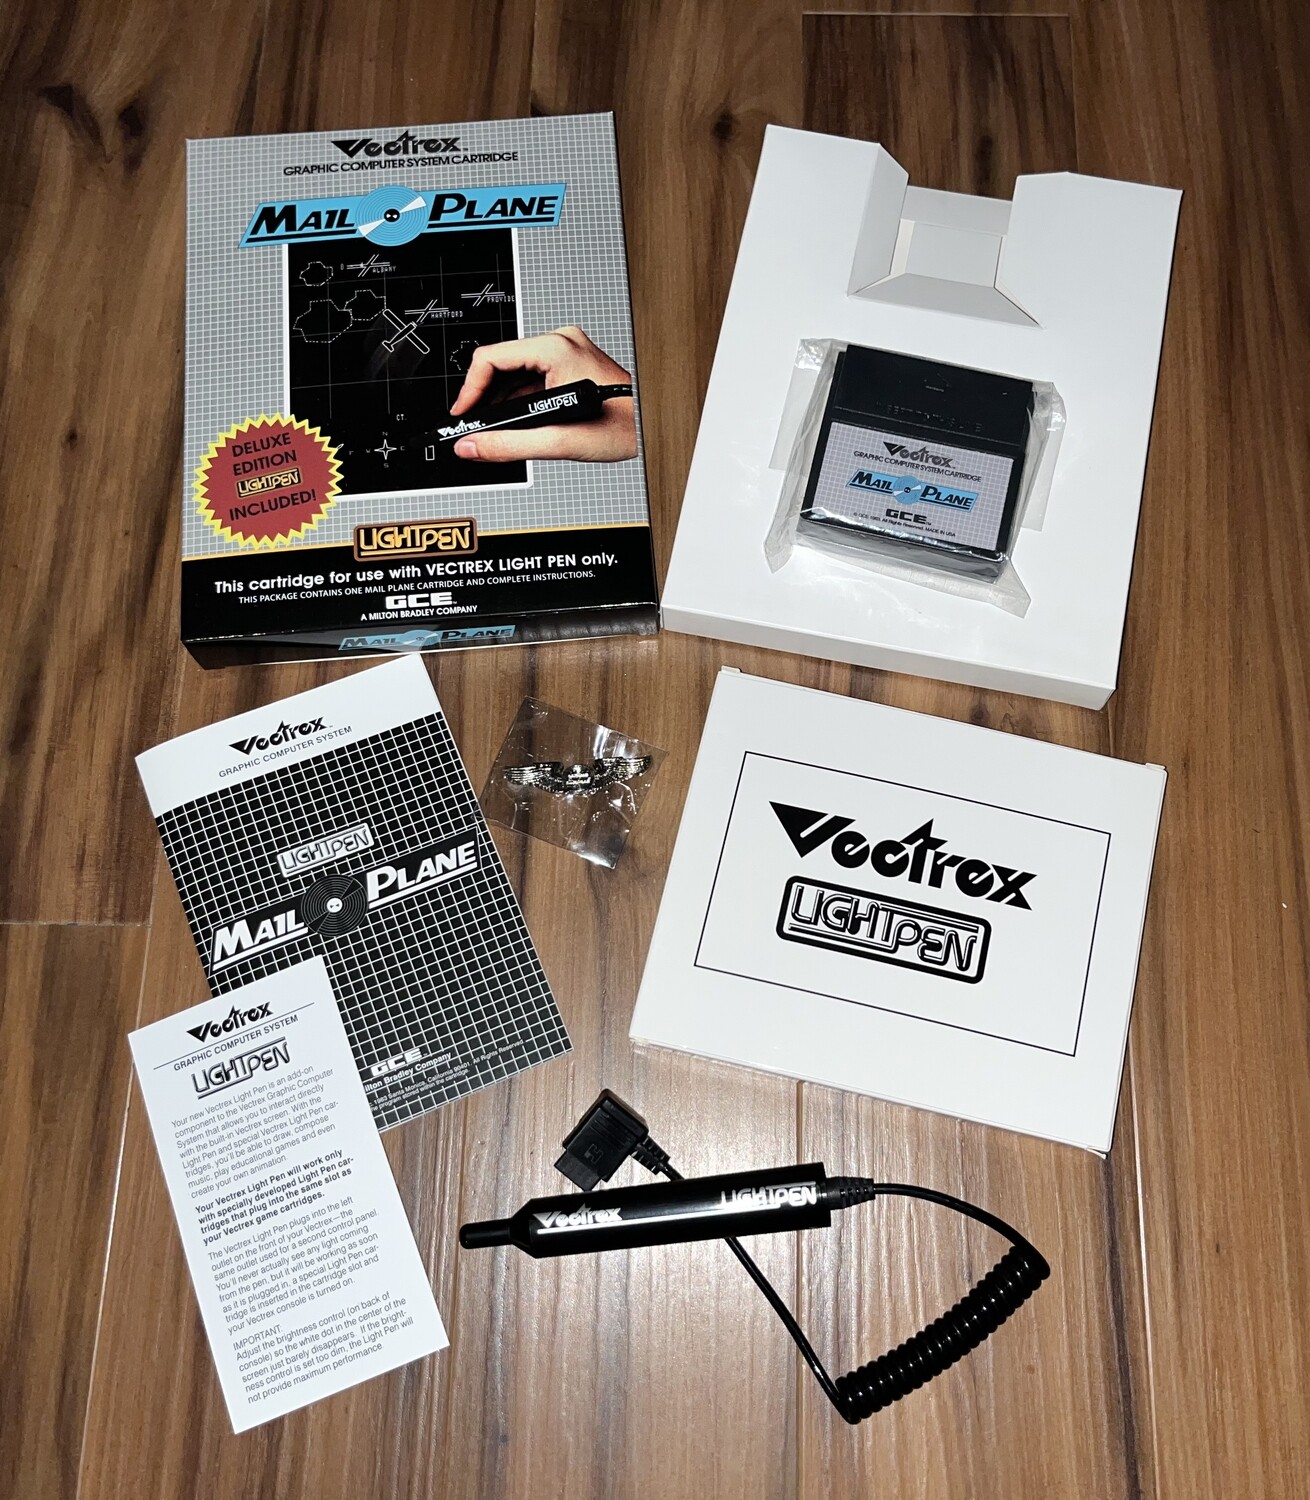 Vectrex Mail Plane, The Deluxe Edition